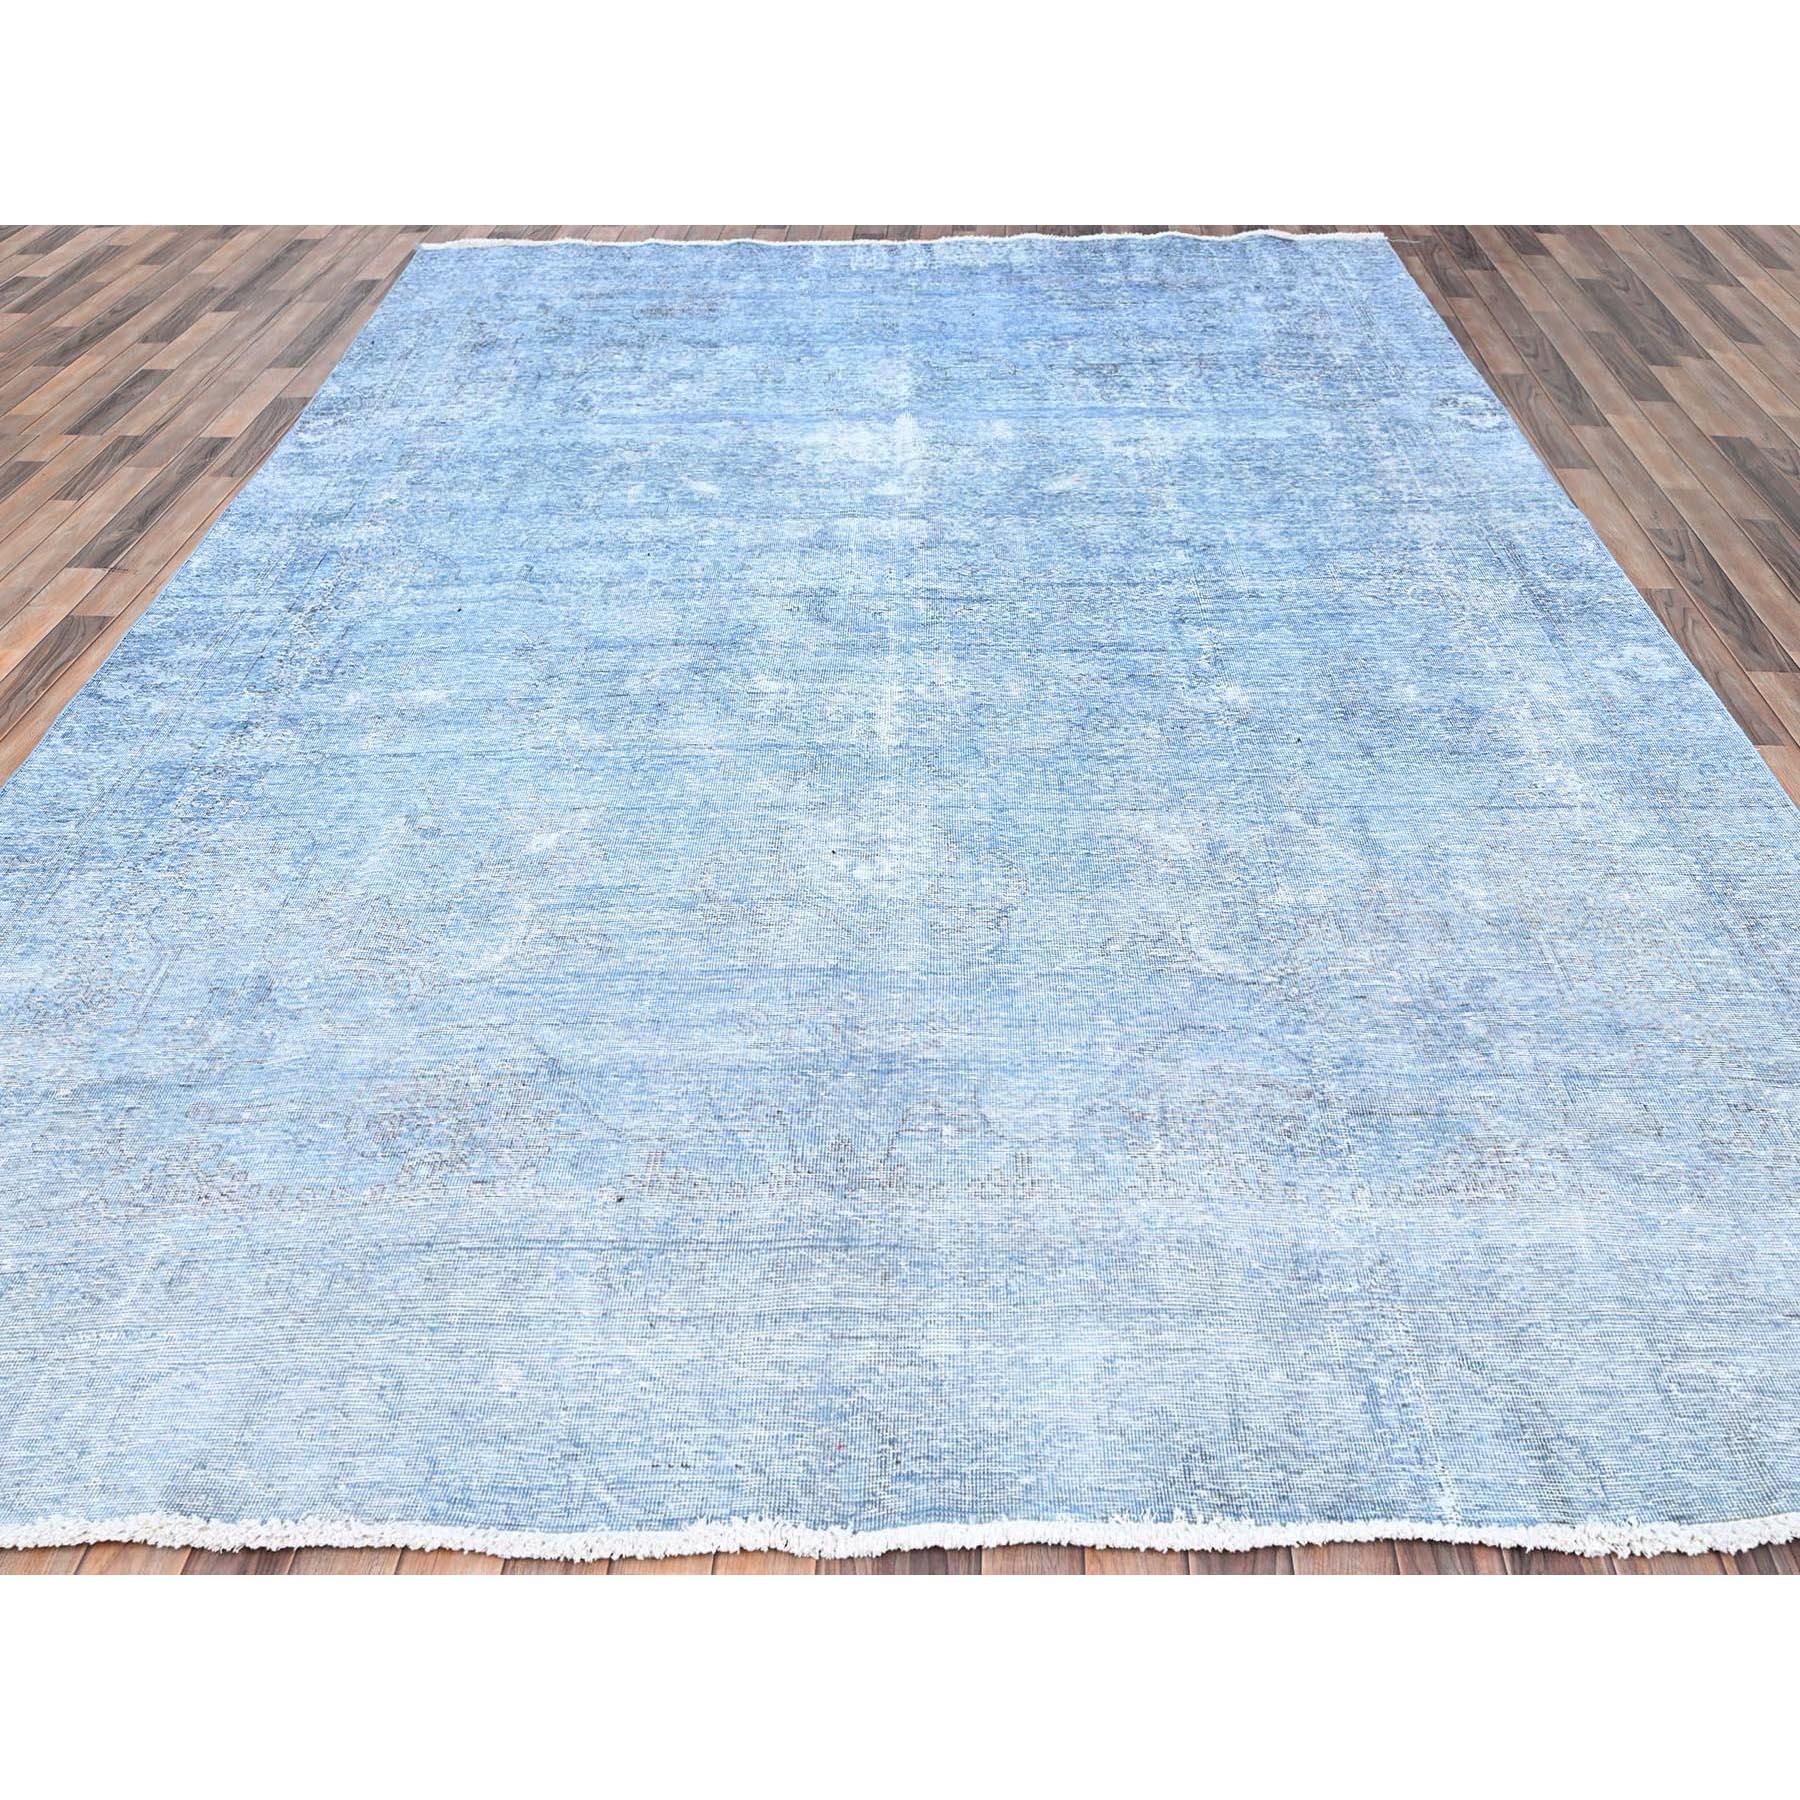 Medieval Blue Hand Knotted Overdyed Old Persian Tabriz Worn Down Rustic Look Wool Rug For Sale